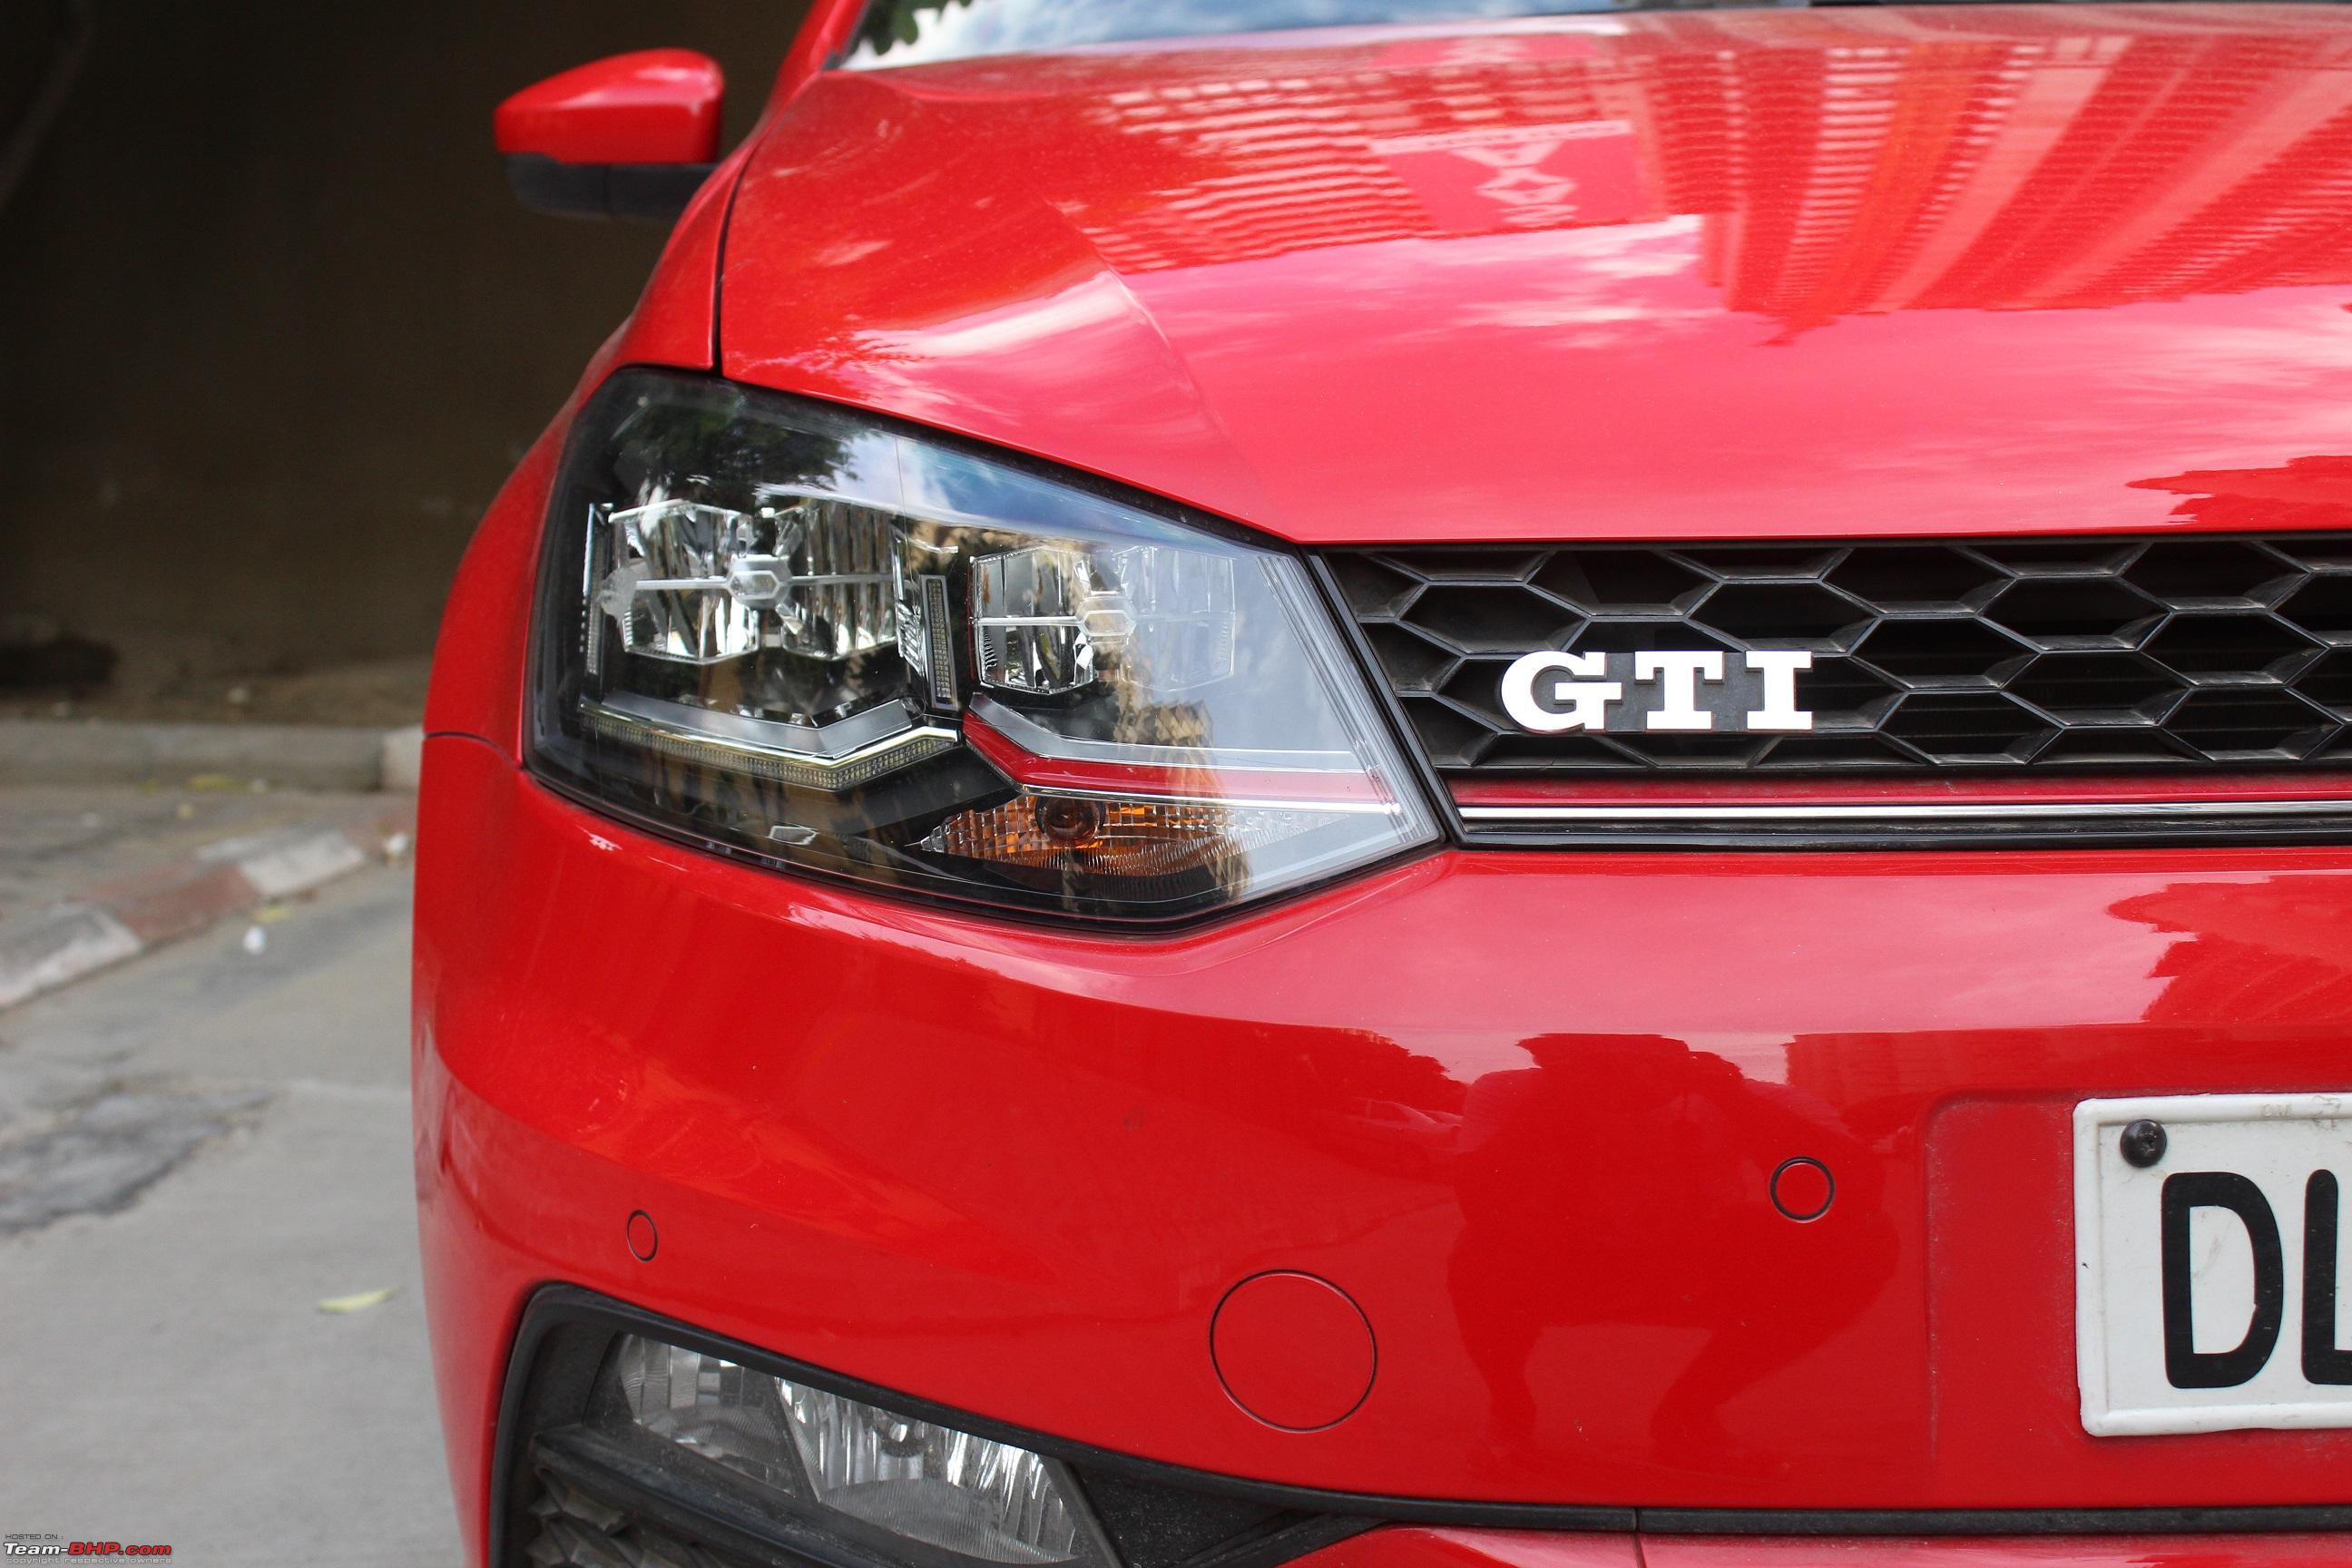 Review: My Red Volkswagen Polo 1.8L GTI - Team-BHP